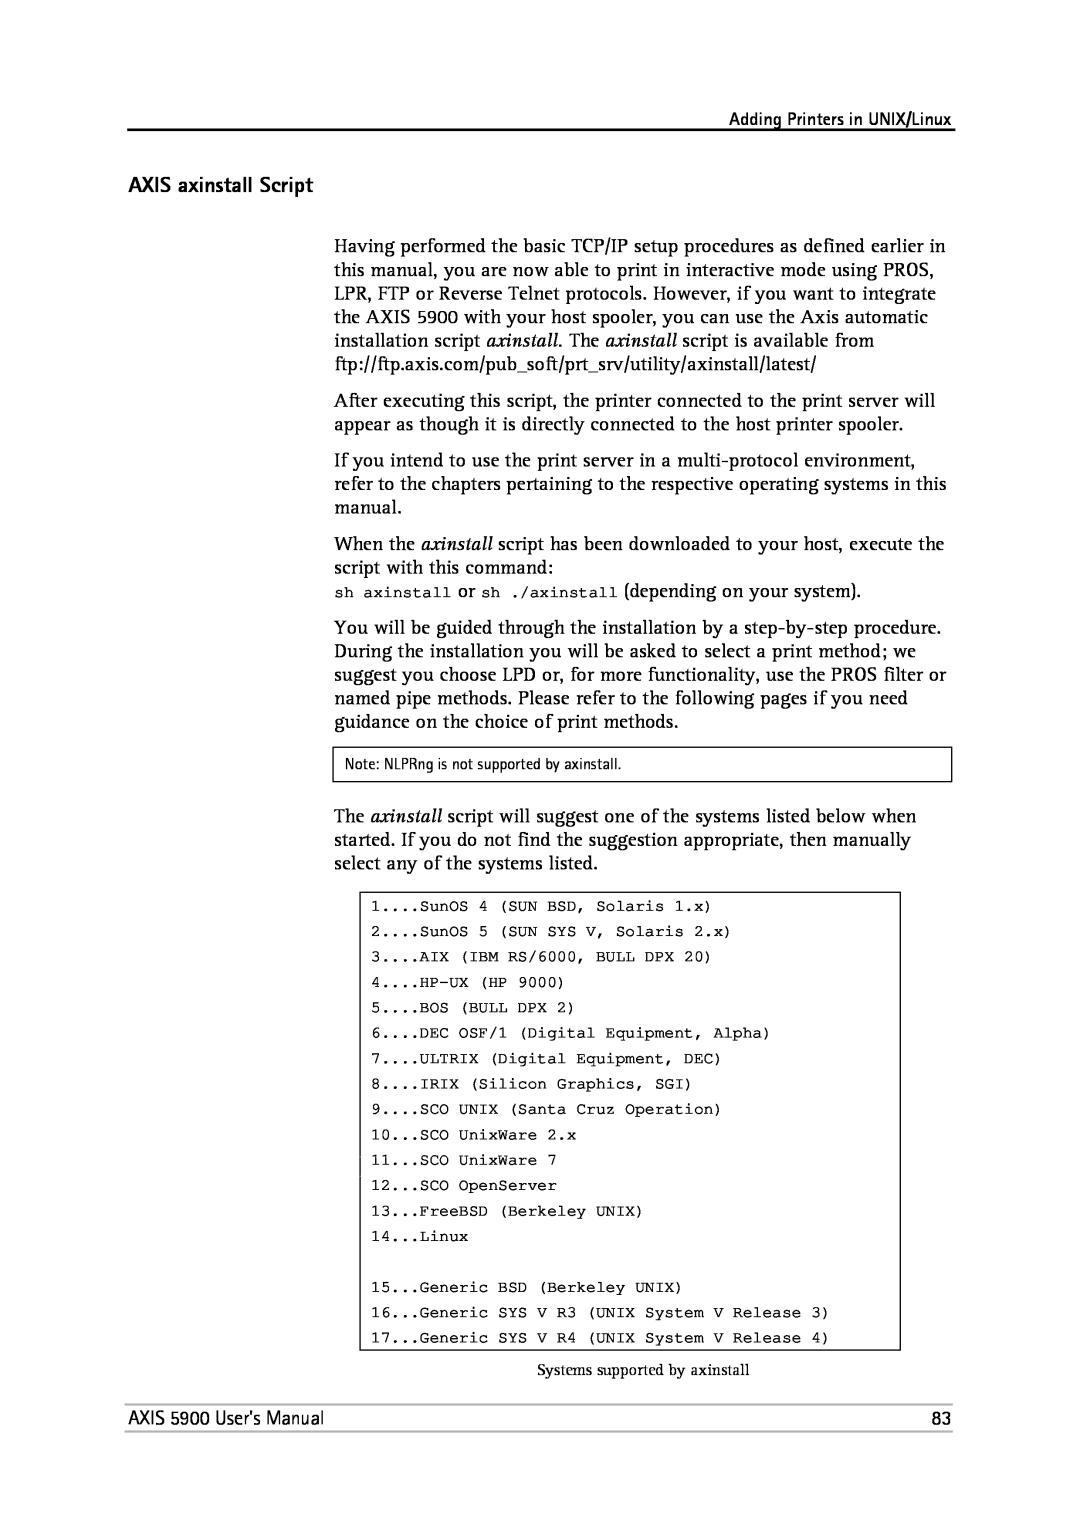 Philips 5900 user manual AXIS axinstall Script, Note NLPRng is not supported by axinstall, Systems supported by axinstall 